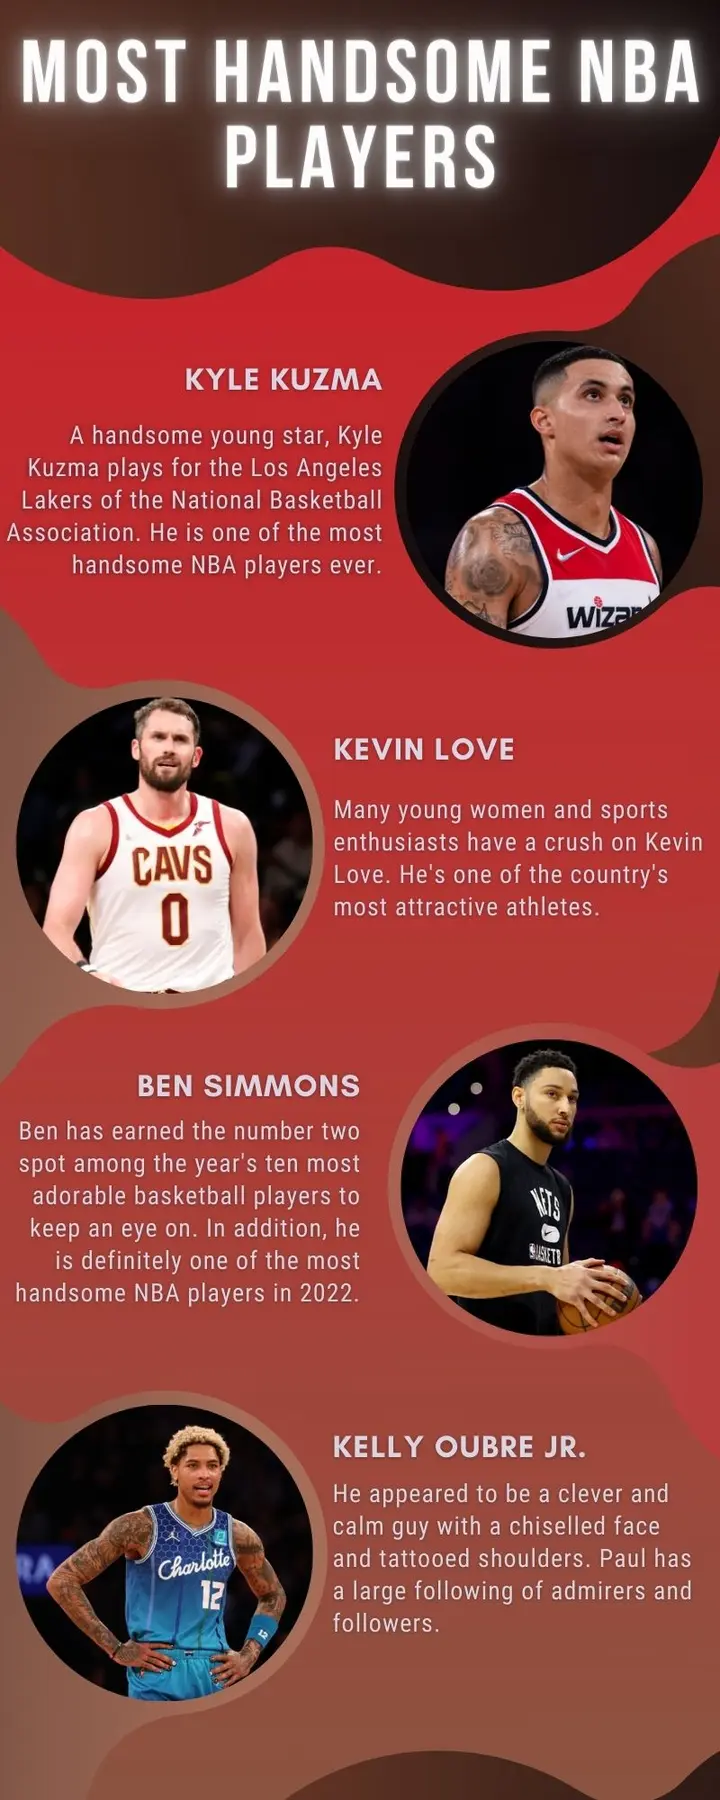 Most handsome NBA players